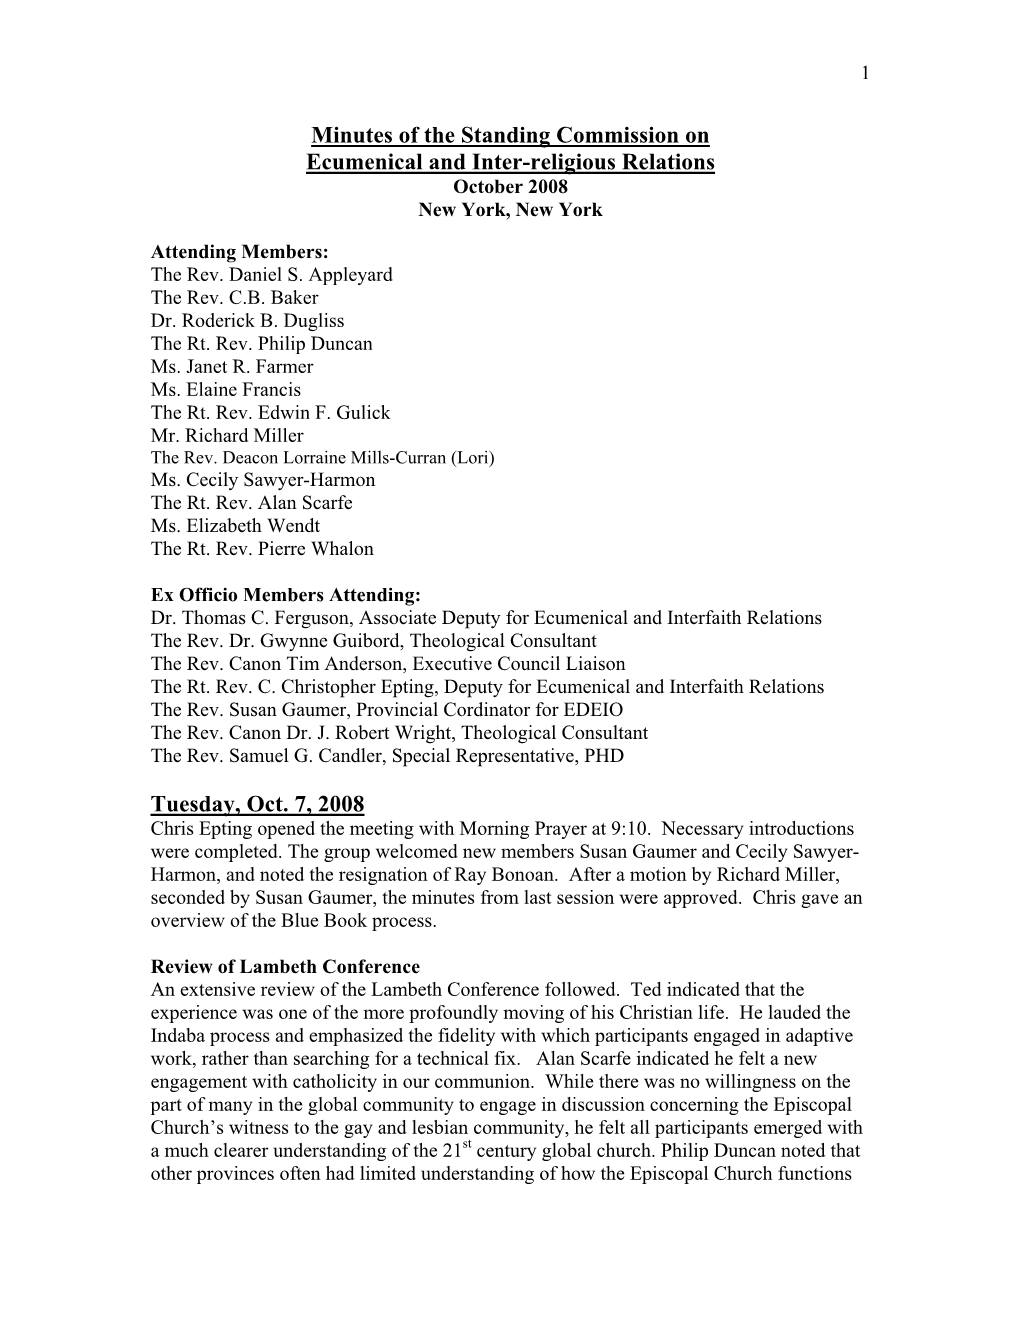 Minutes of the Standing Commission on Ecumenical and Interreligious